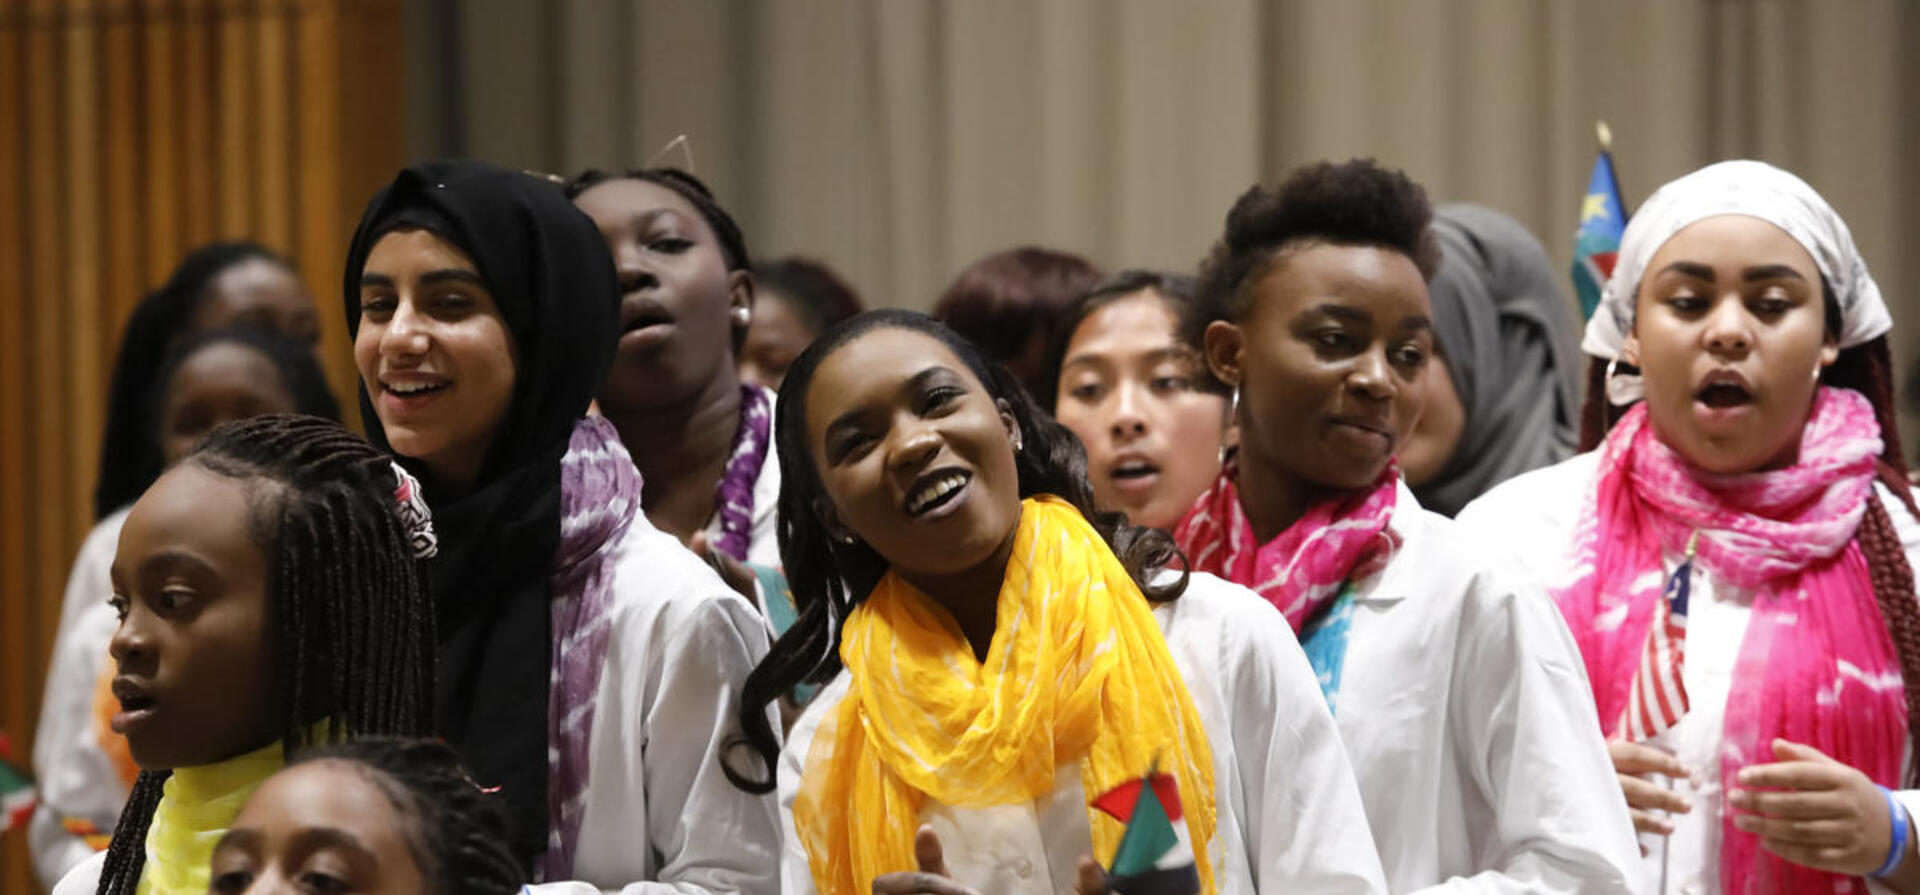 Refugee and immigrant girls from 19 countries unite their voices in one choir UNHCR photo